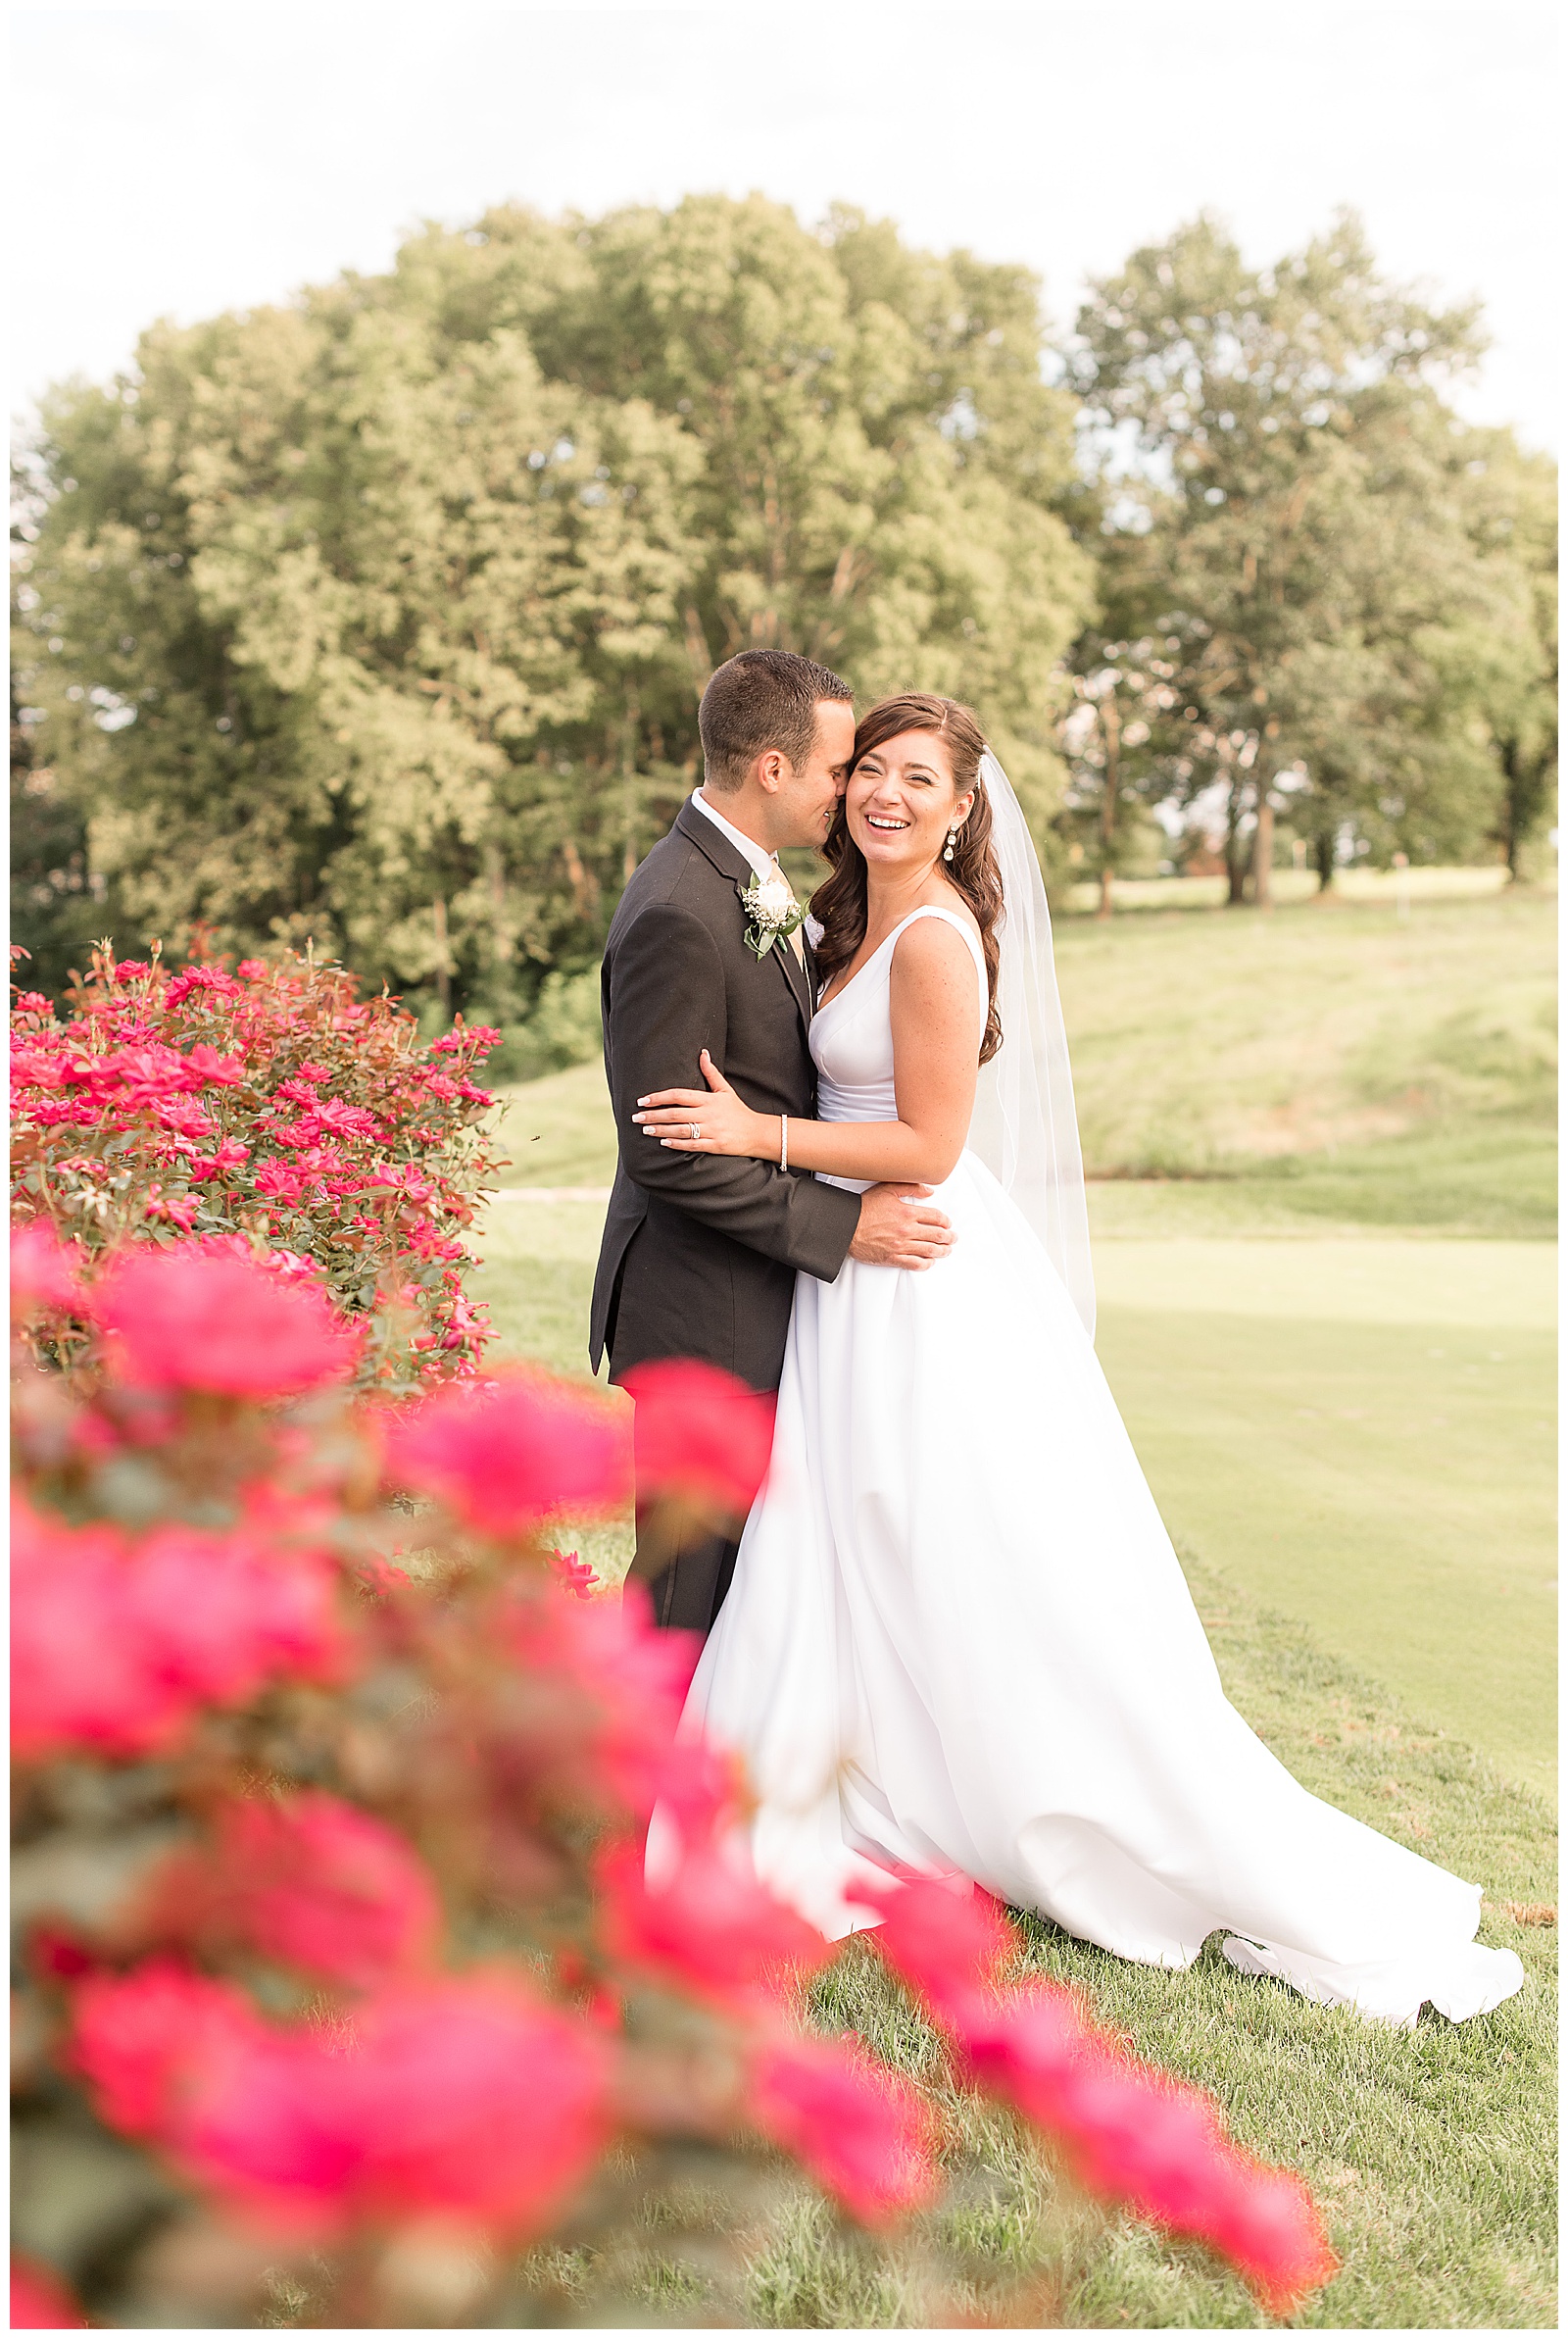 bride looking off to side and giggling as groom nuzzles in, in front of a rose bush